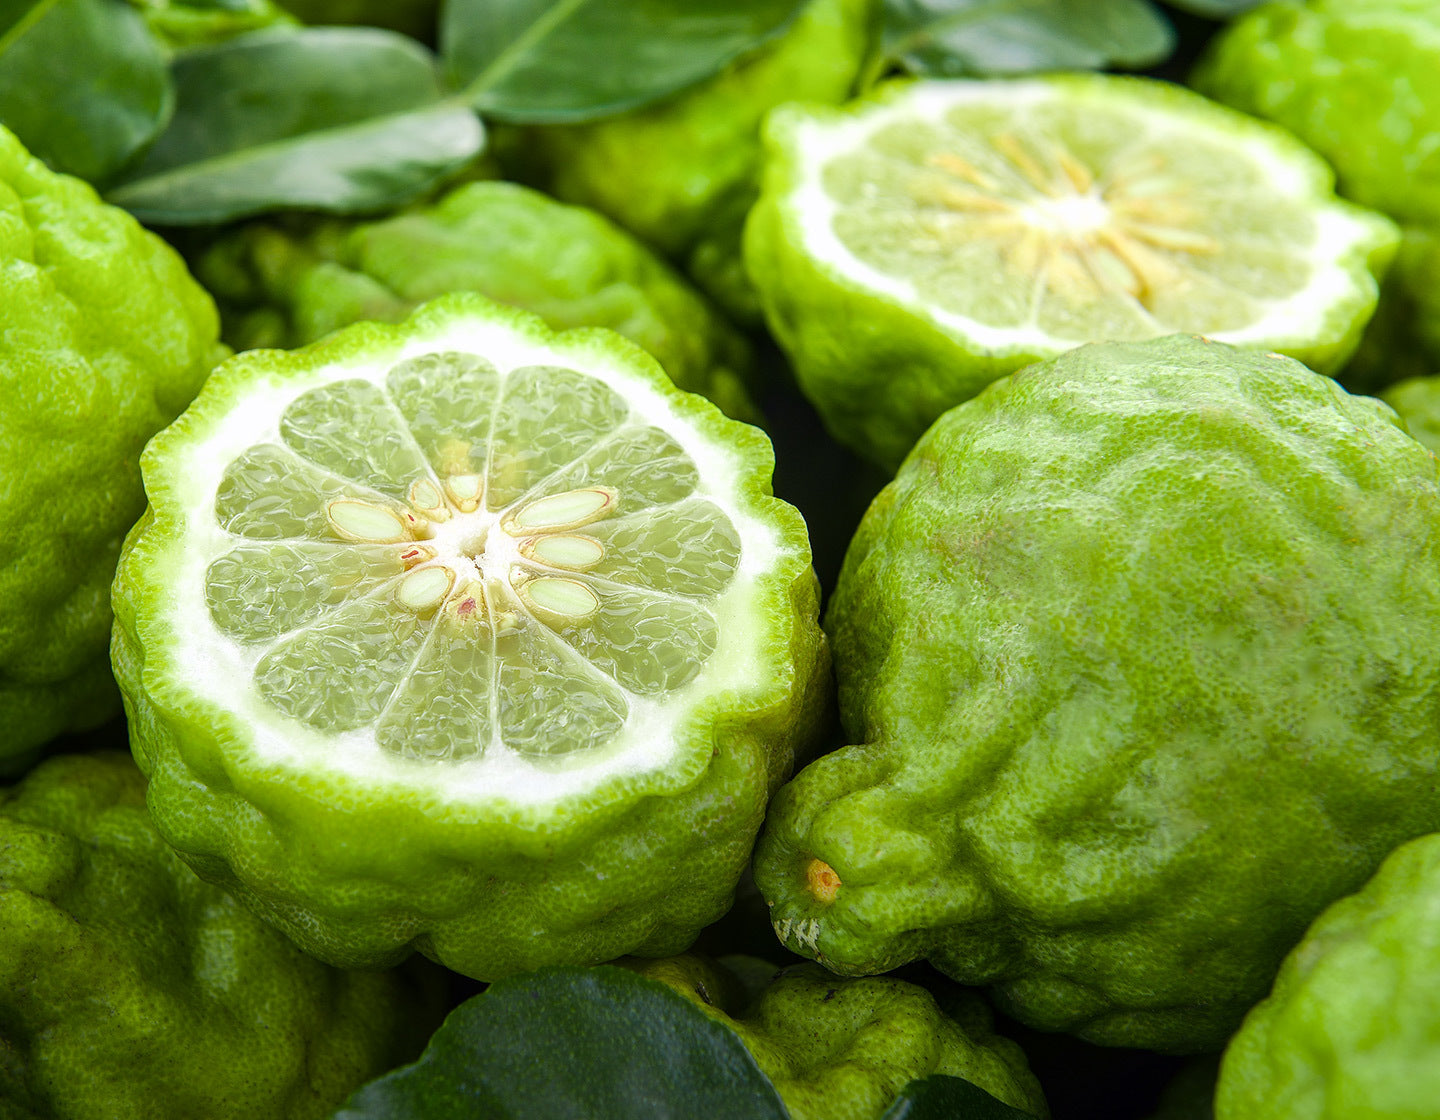 A large pile of green bergamot fruit, with one sliced open